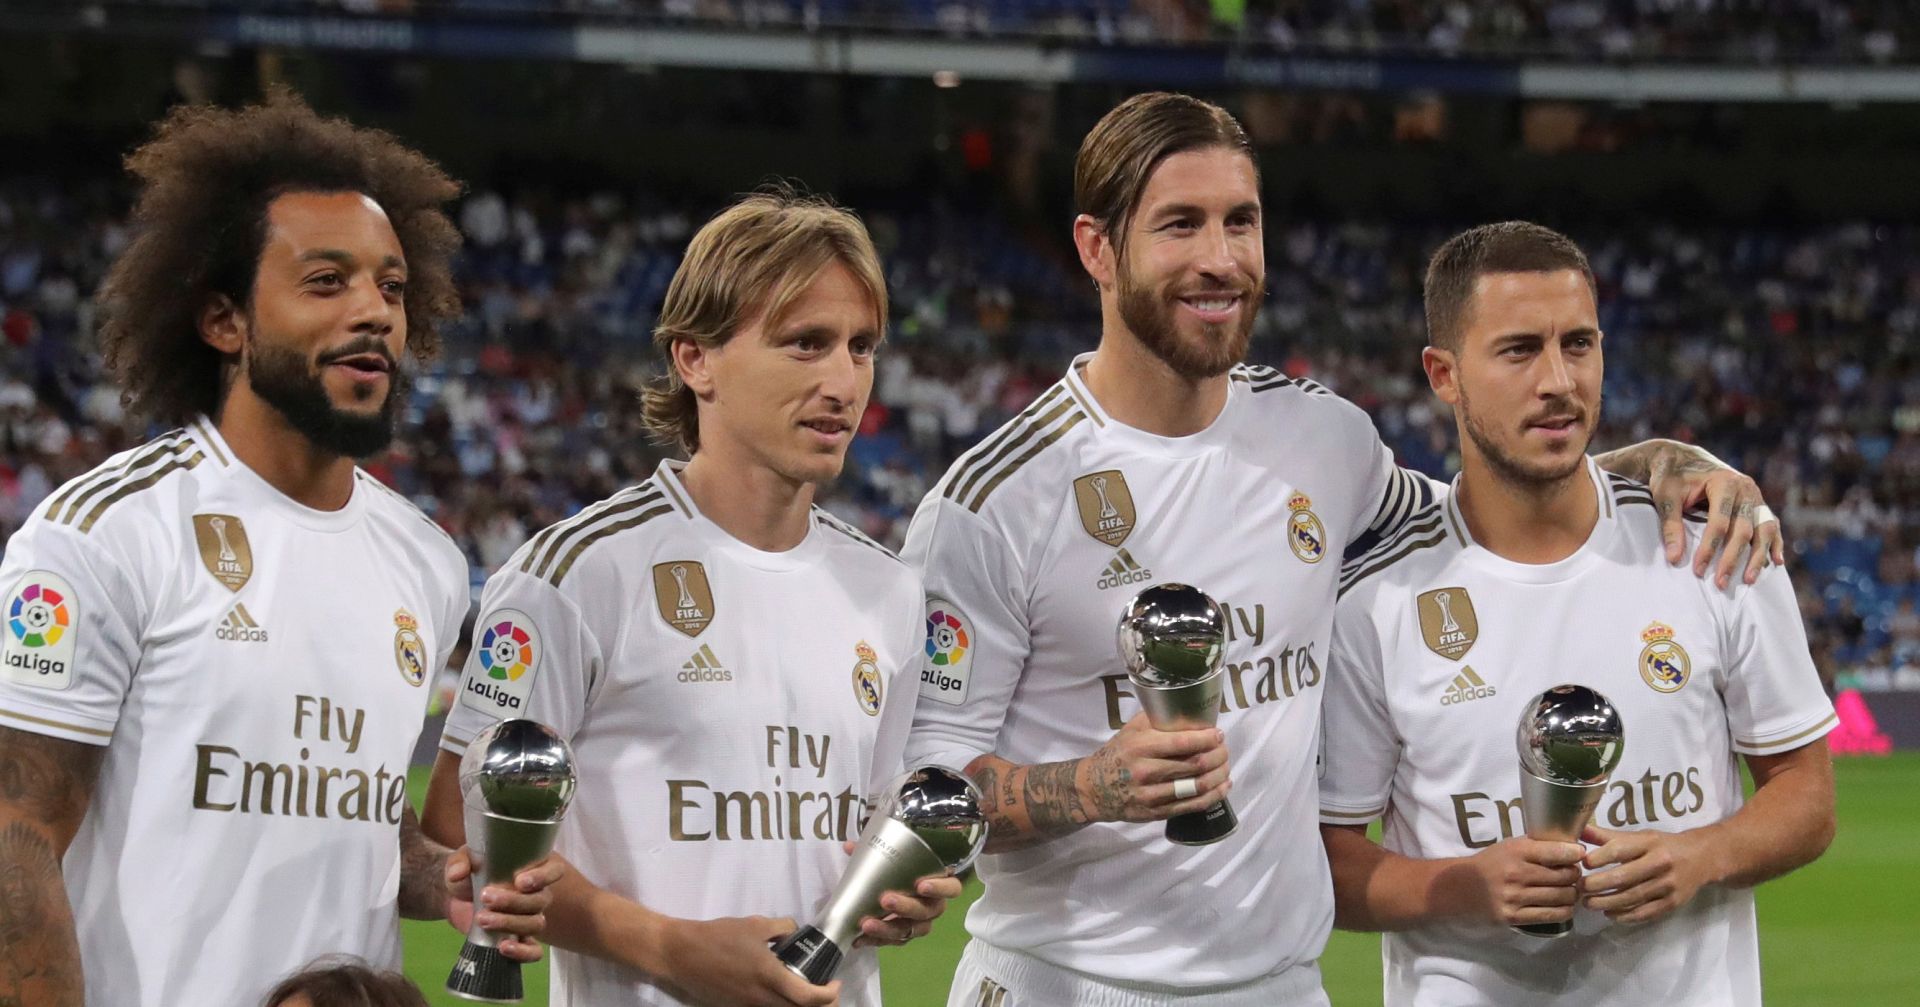 epa07869269 Real Madrid's players (L-R) Marcelo, Luka Modric, Sergio Ramos and Eden Hazard pose for the media with their awards after been elected at FIFA's FIFPro World XI, before the Spanish LaLiga match between Real Madrid and CA Osasuna at Santiago Bernabeu stadium in Madrid, Spain, 25 September 2019.  EPA/JuanJo Martin